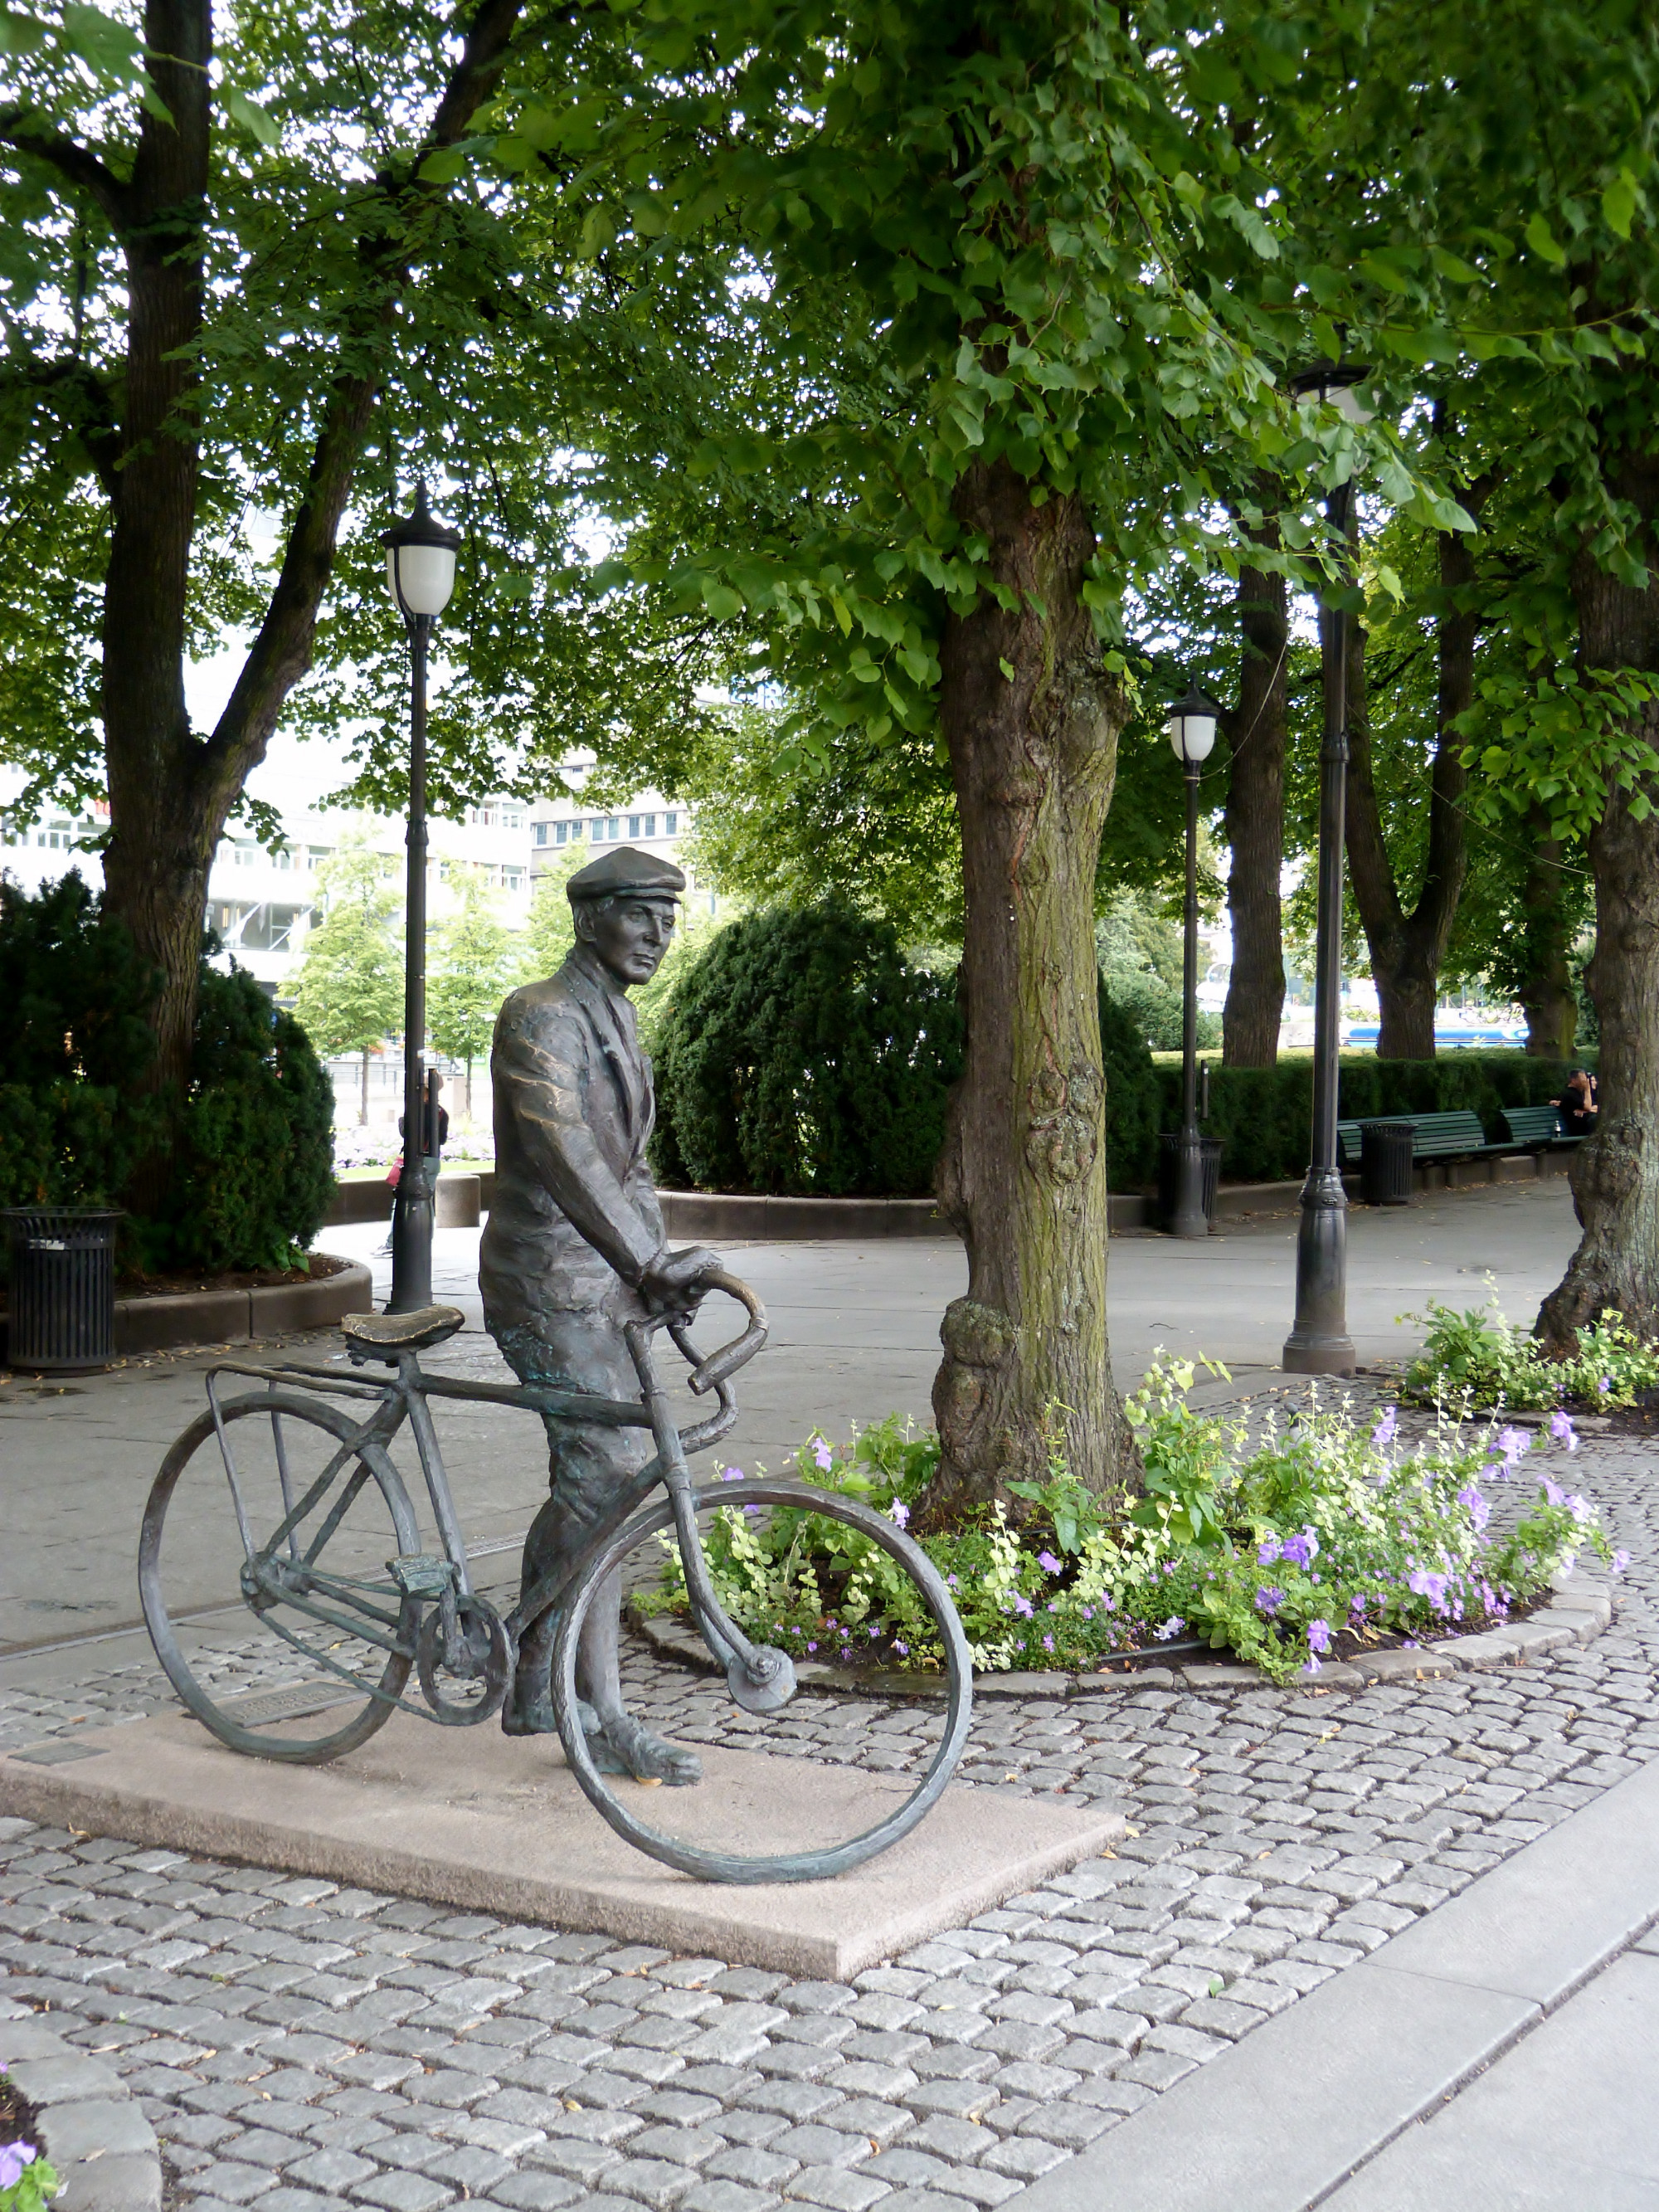 «Man with a bike» — a statue by Norwegian artist Per Ung near National Theater.